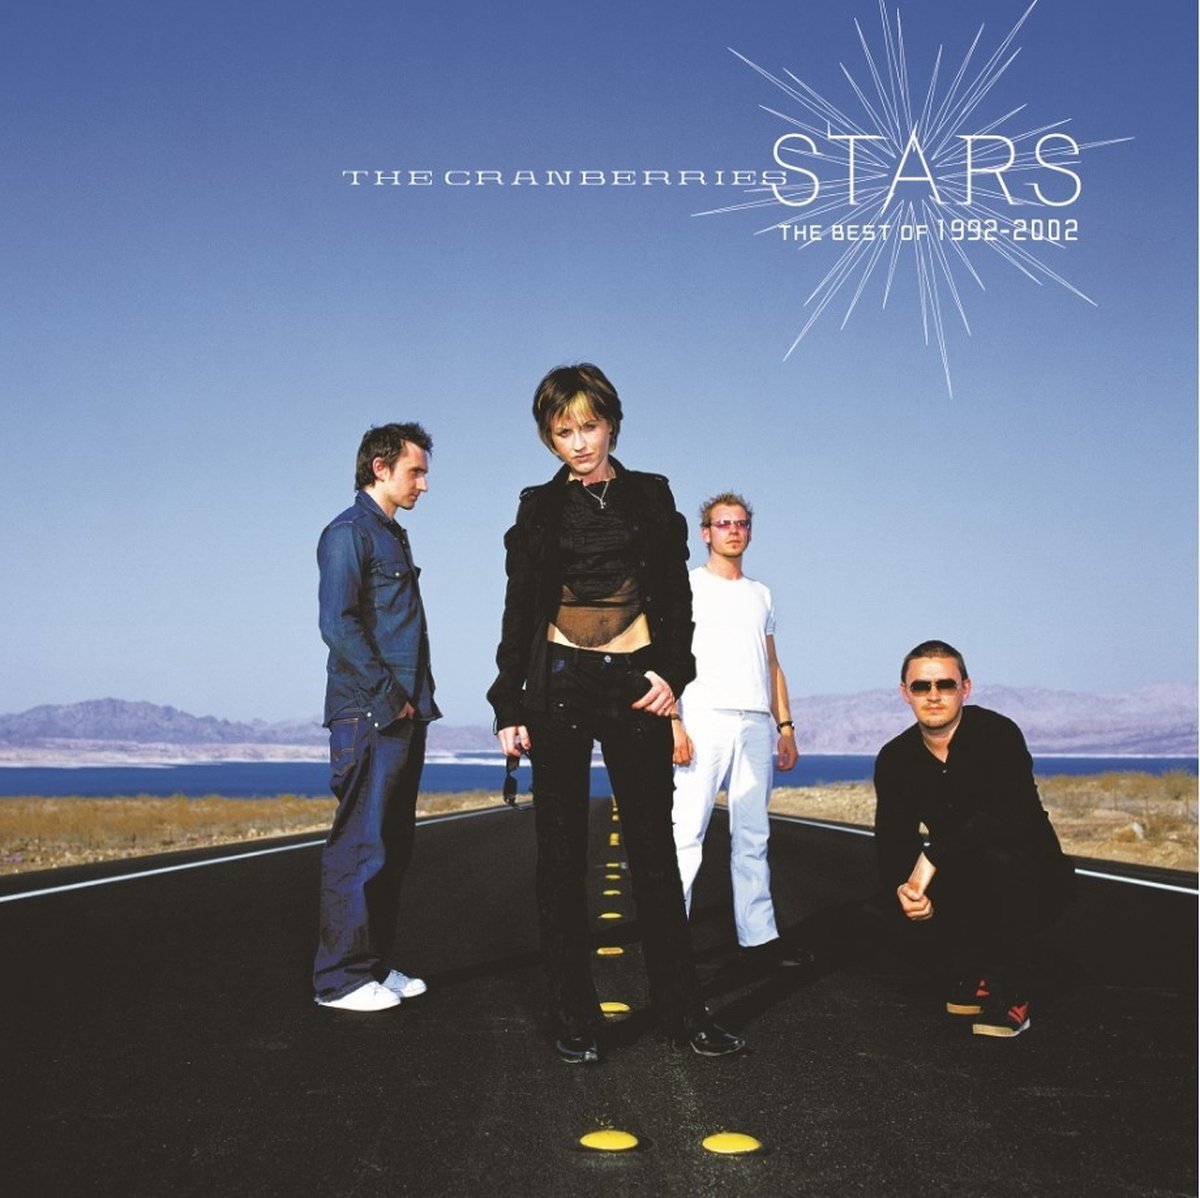 The Cranberries - Stars (The Best Of 1992-2002) (2 LP) - the Cranberries